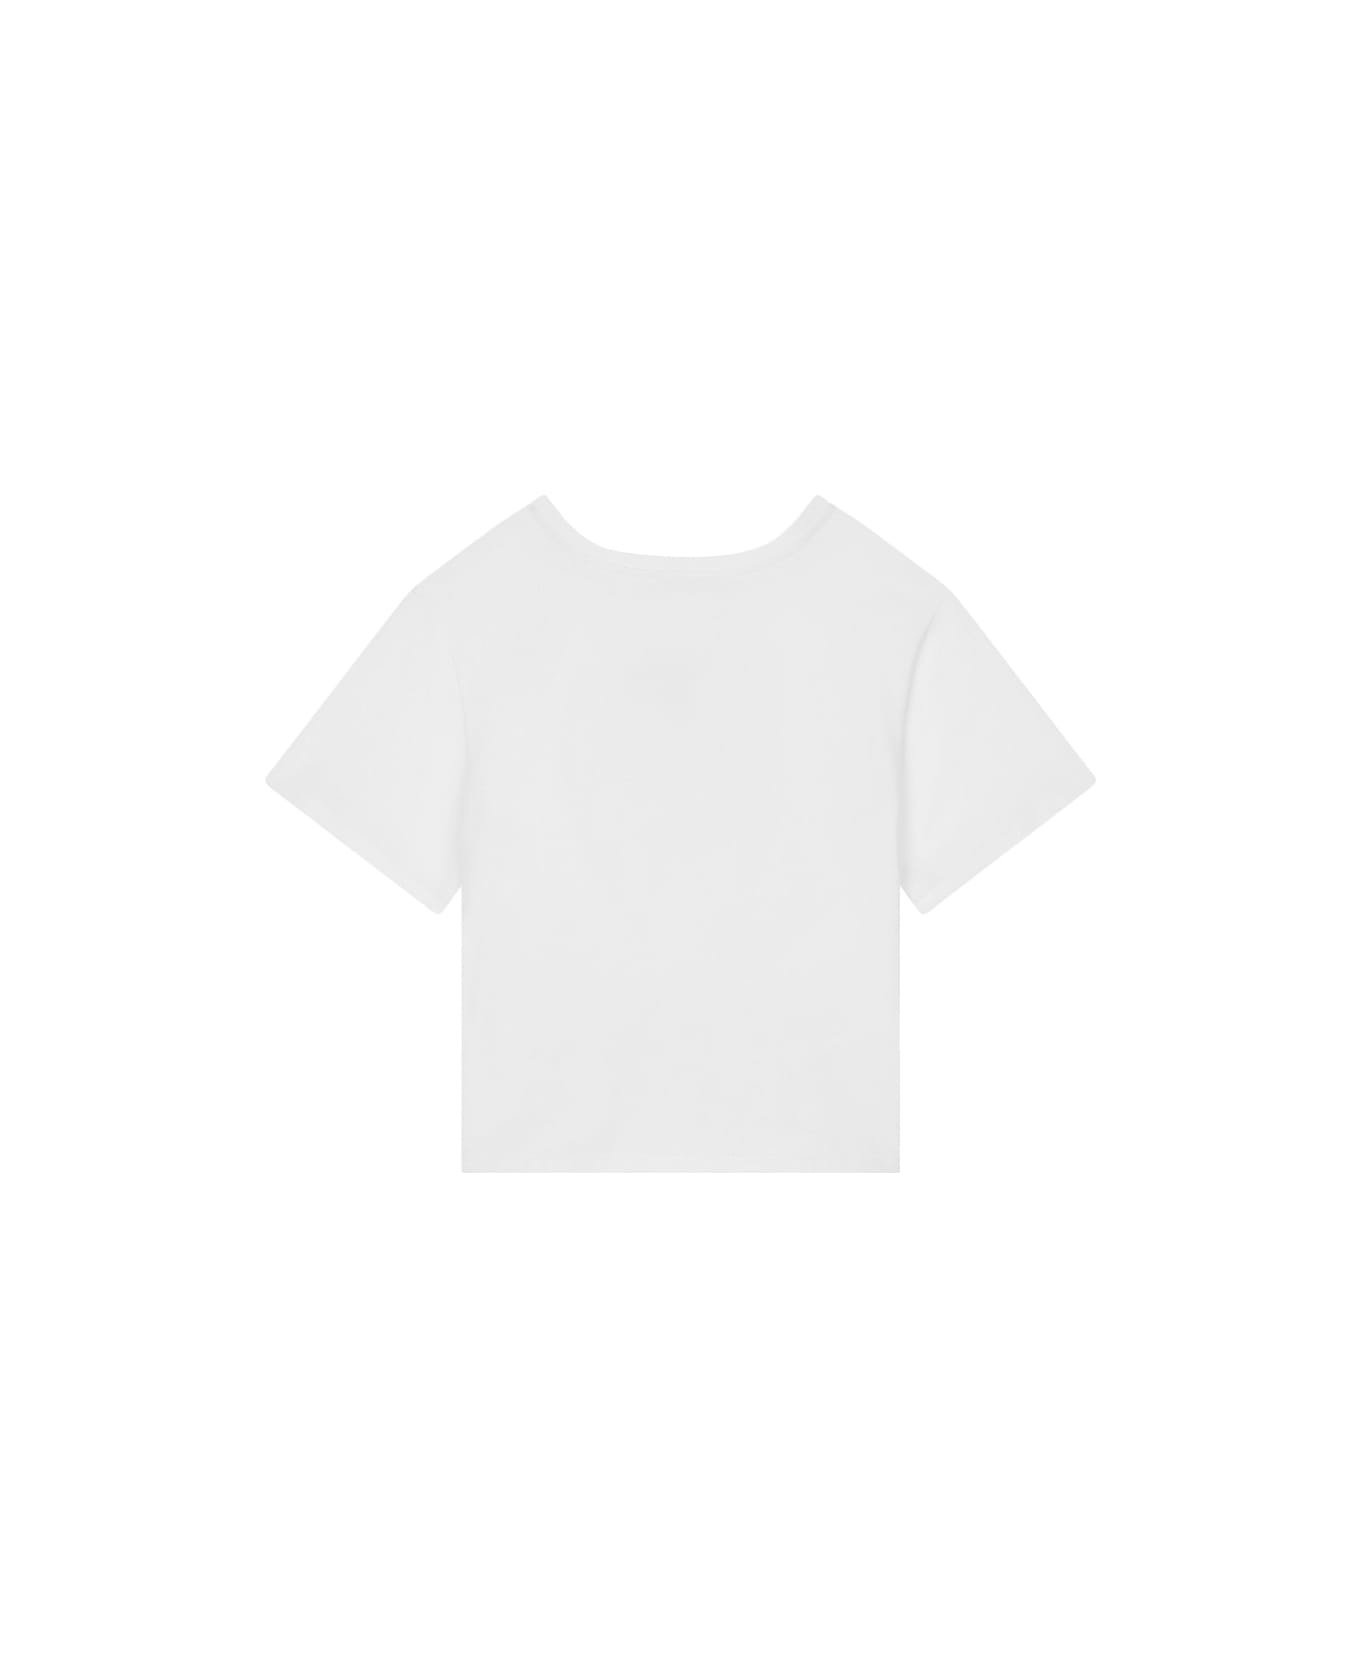 Dolce & Gabbana White T-shirt With Dg Cart Patch And Knot - White